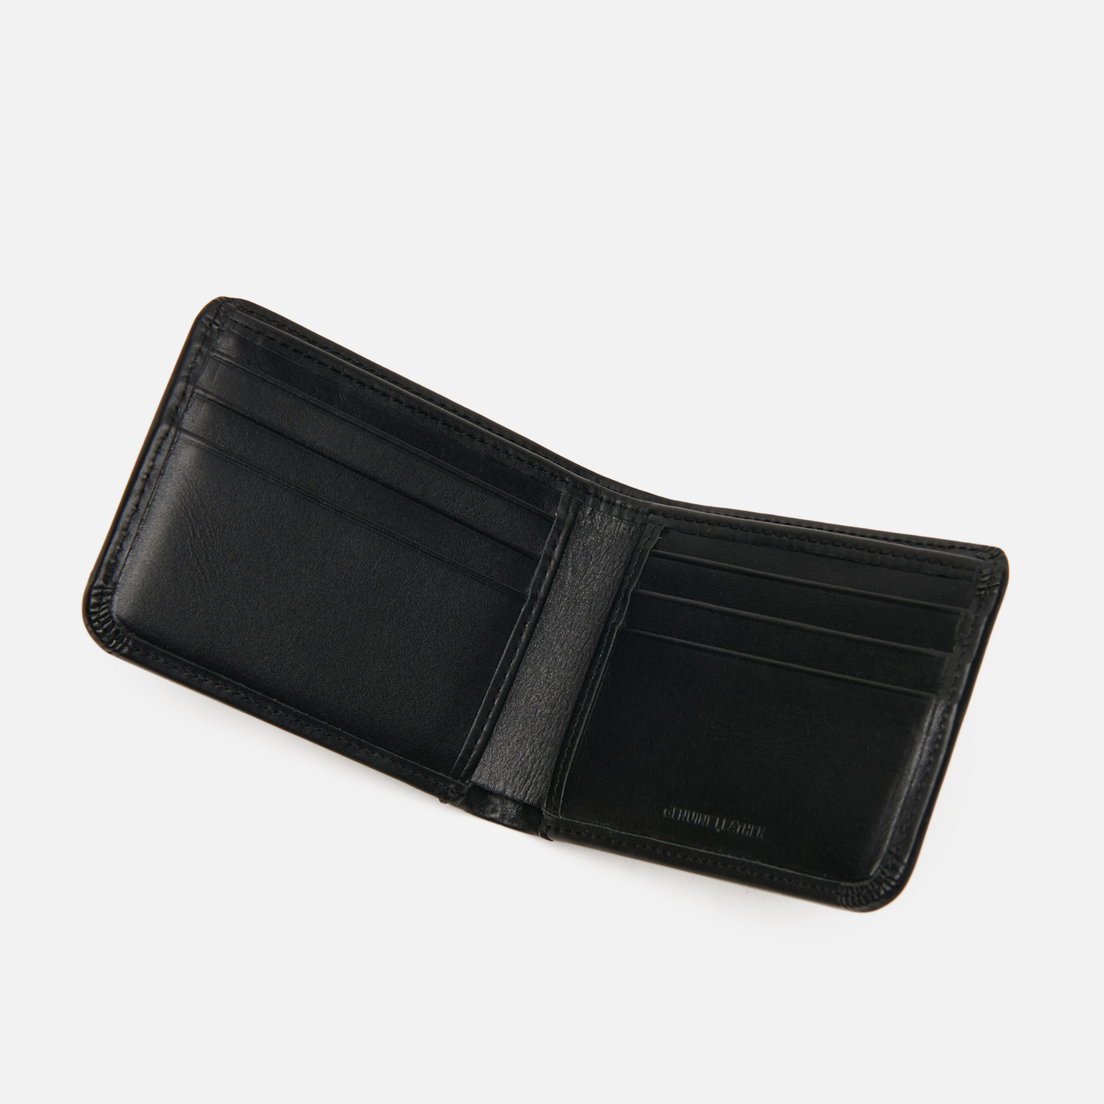 Fred Perry Кошелек Graphic Leather Billfold